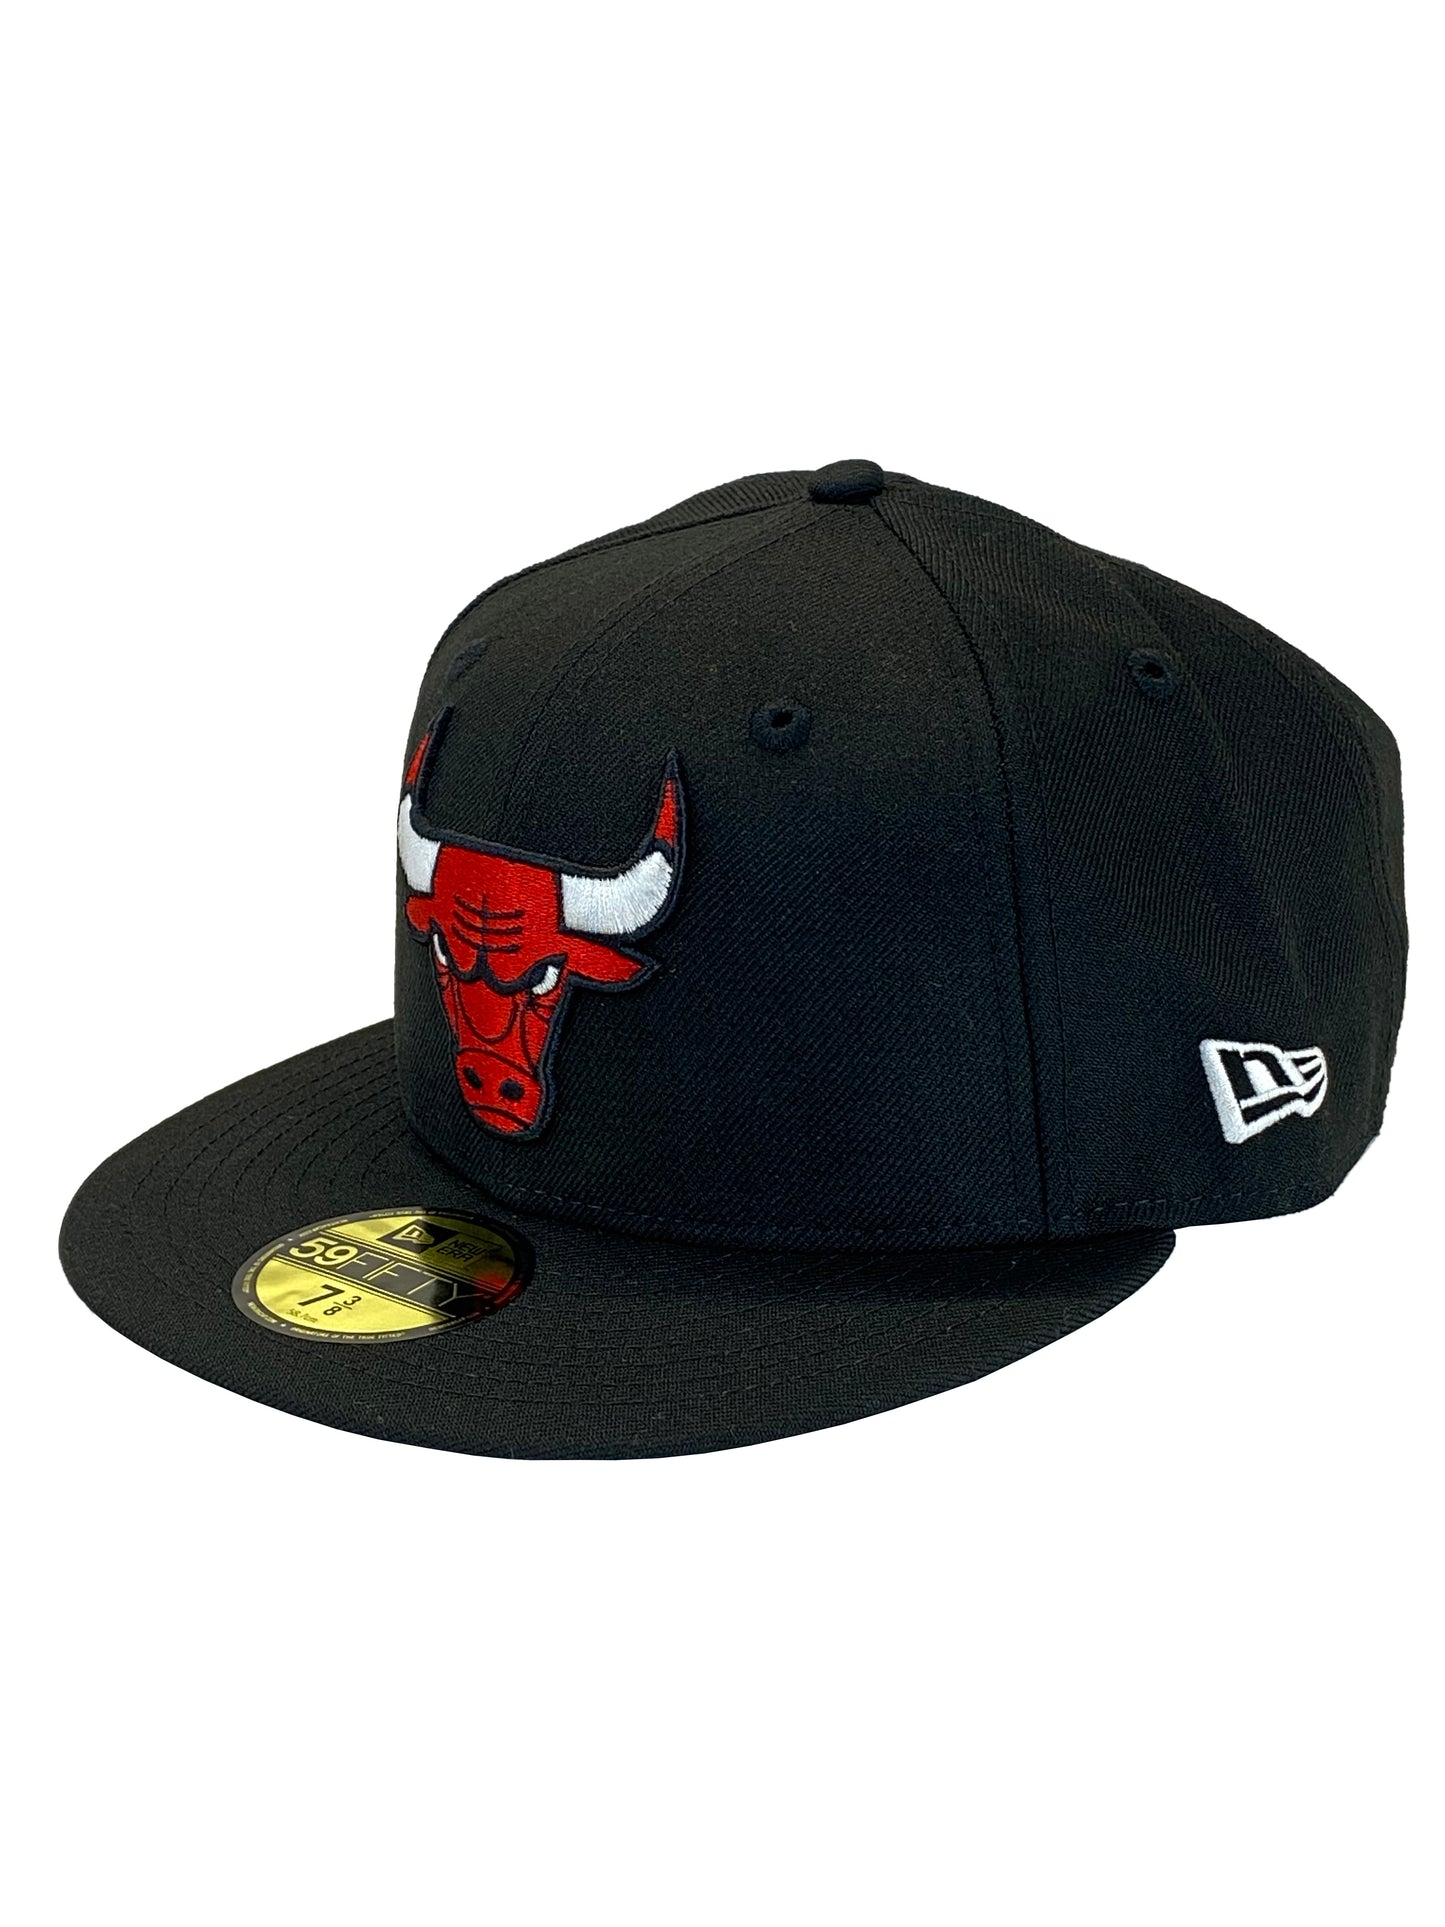 CHICAGO BULLS LIFE QUARTER 59FIFTY FITTED